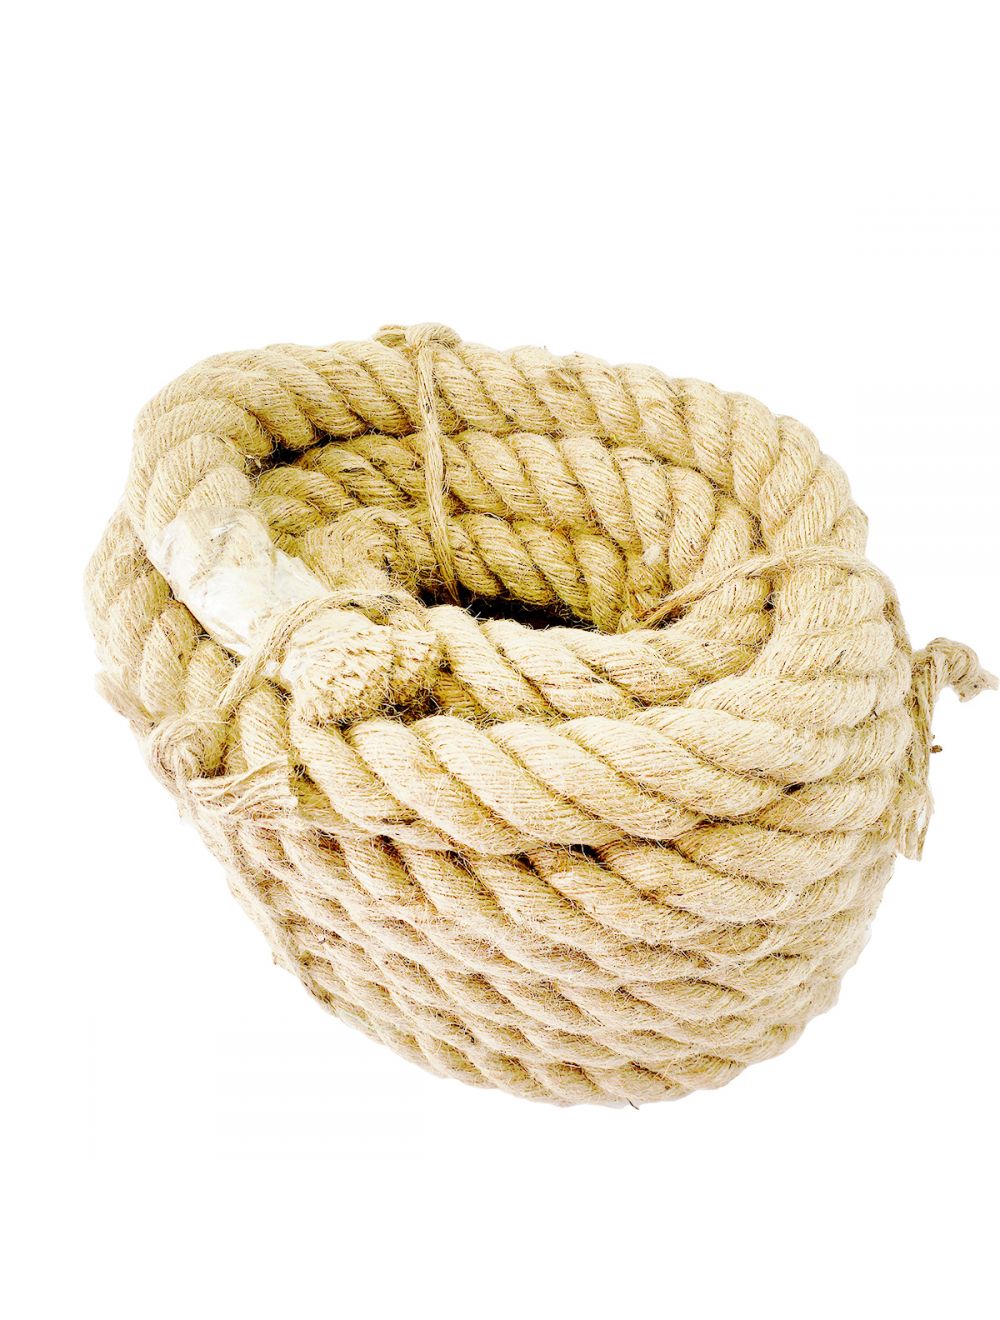 Dody Online Store Natural Jute Rope Burlap Hemp Twine Hessian Cord 40mm  Thick 10m long Local Pickup, Local Shop, Drop Shipping